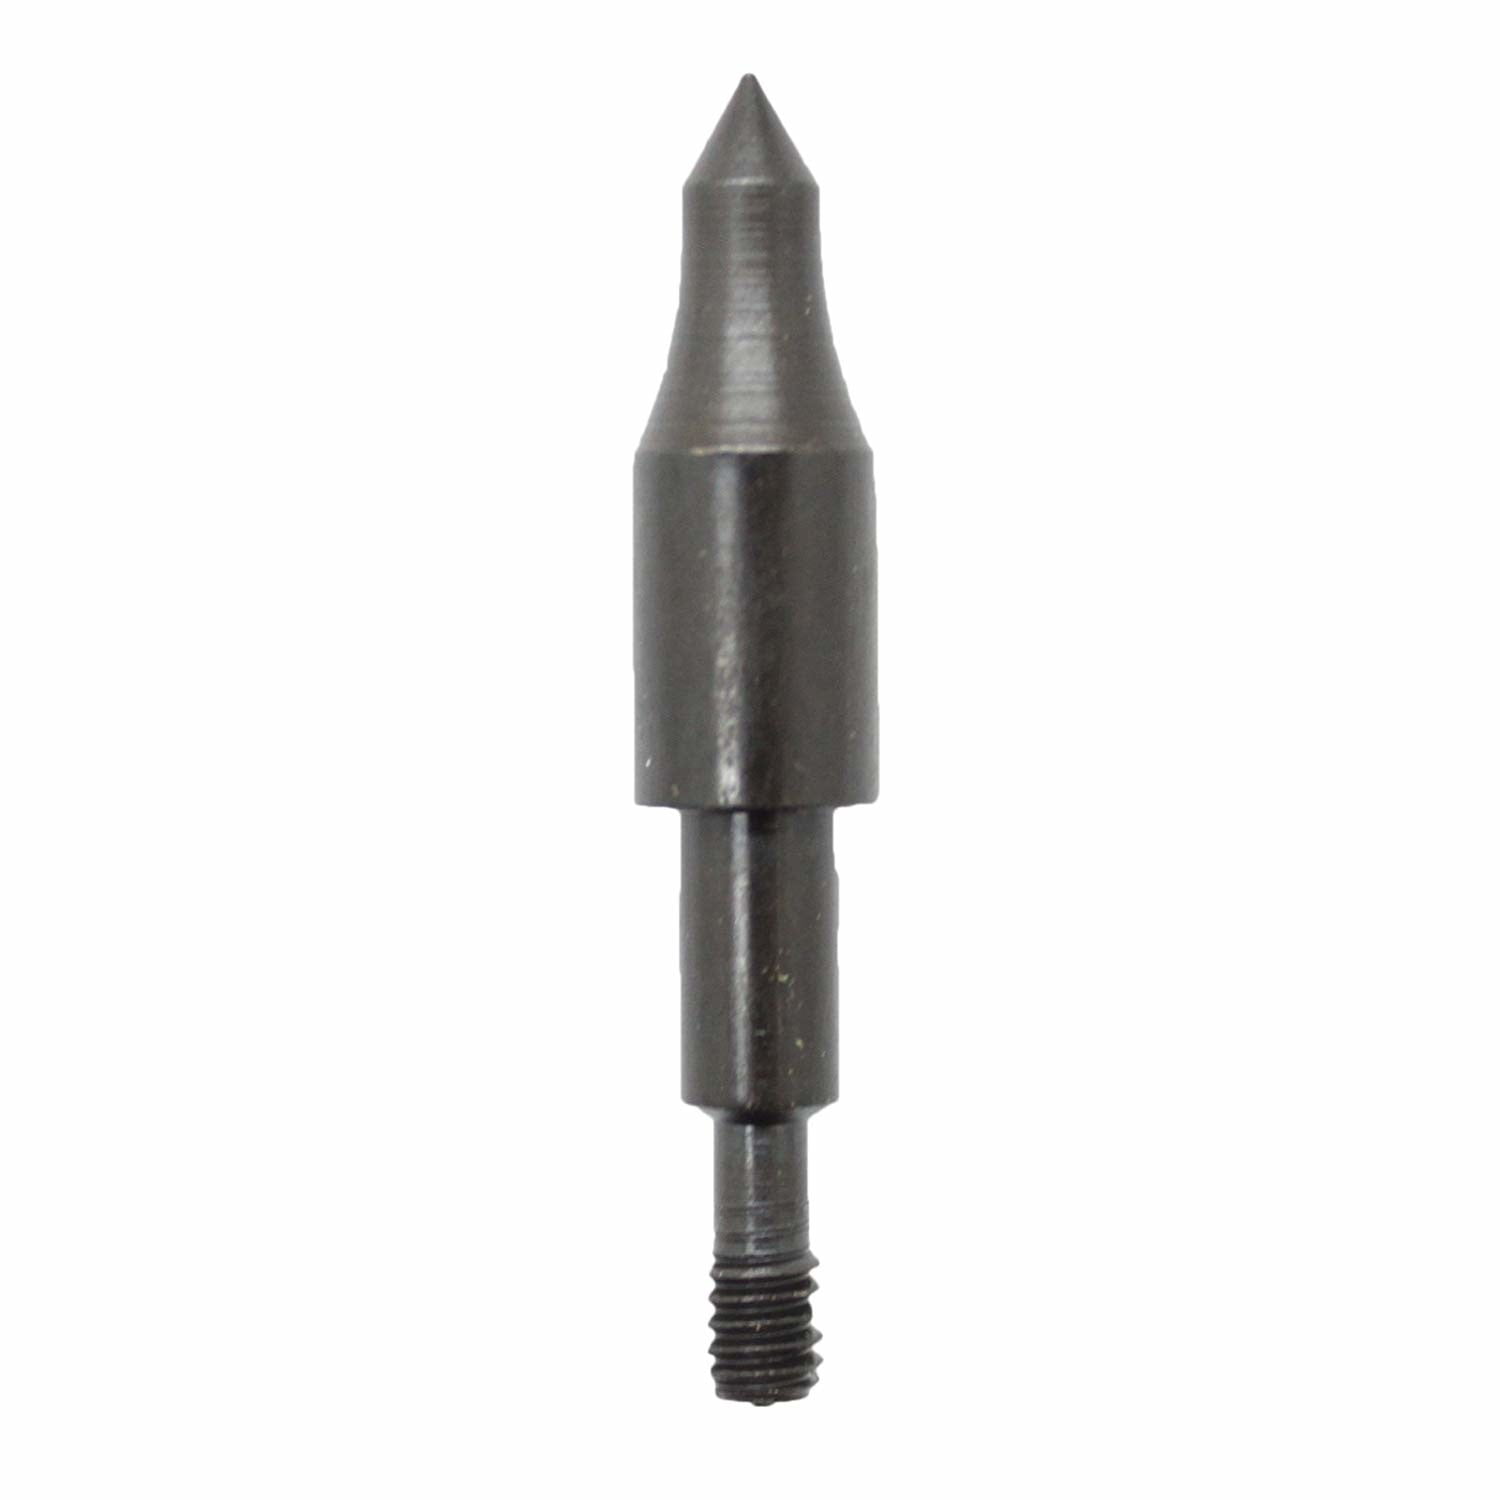 2117 12 New Screw-in Blunt Points 125 gr 2016 5/16 Hunting or Target 2018 